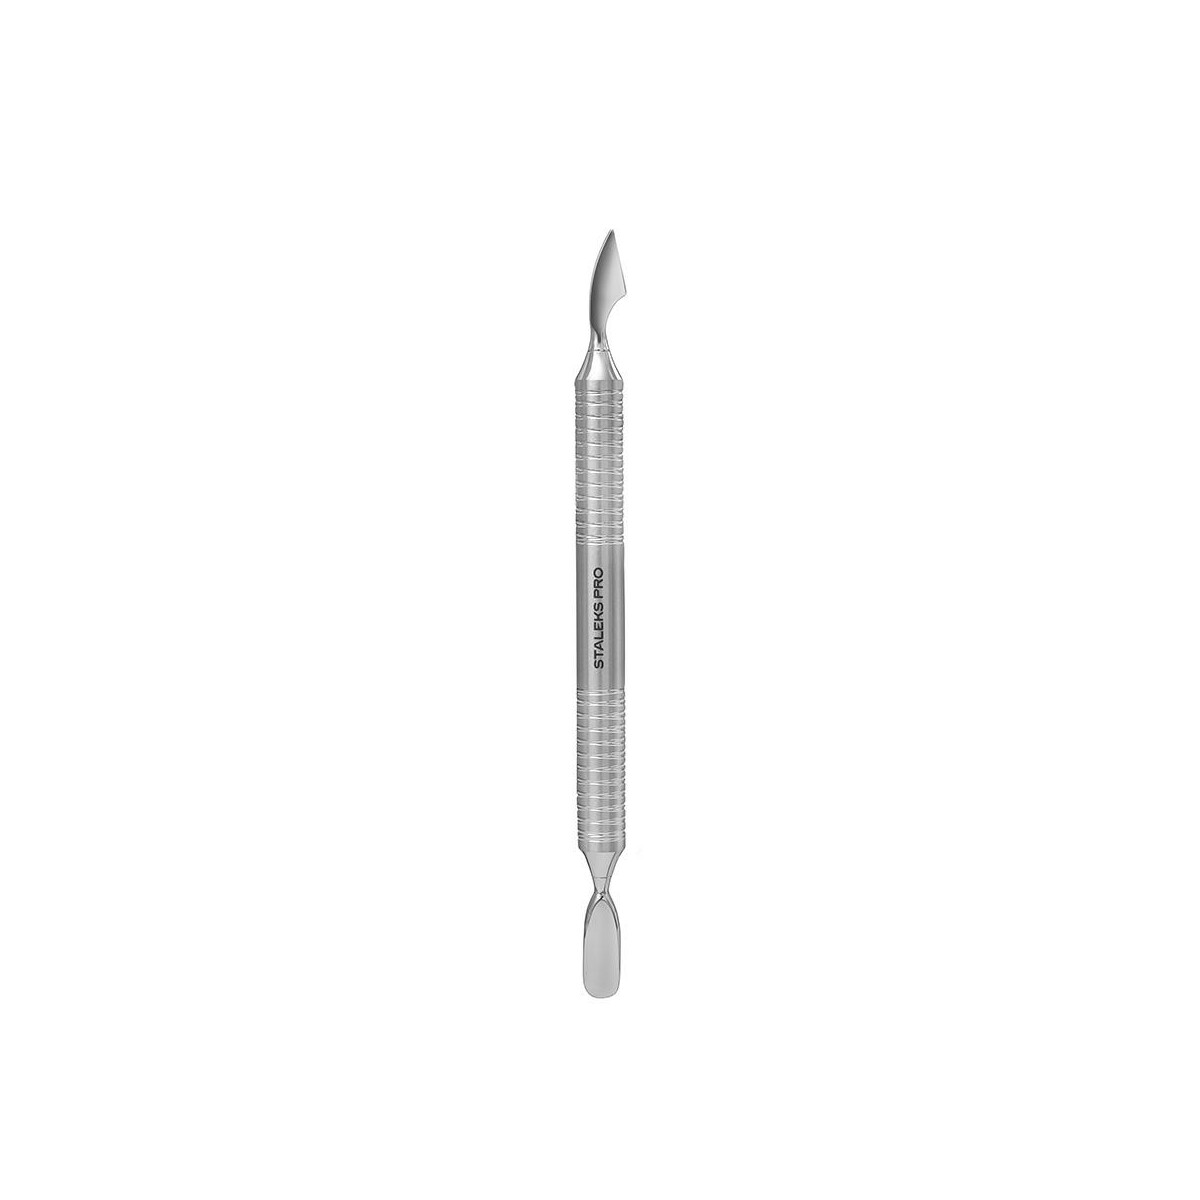 Hollow manicure pusher EXPERT 100 TYPE 3 (rounded pusher...